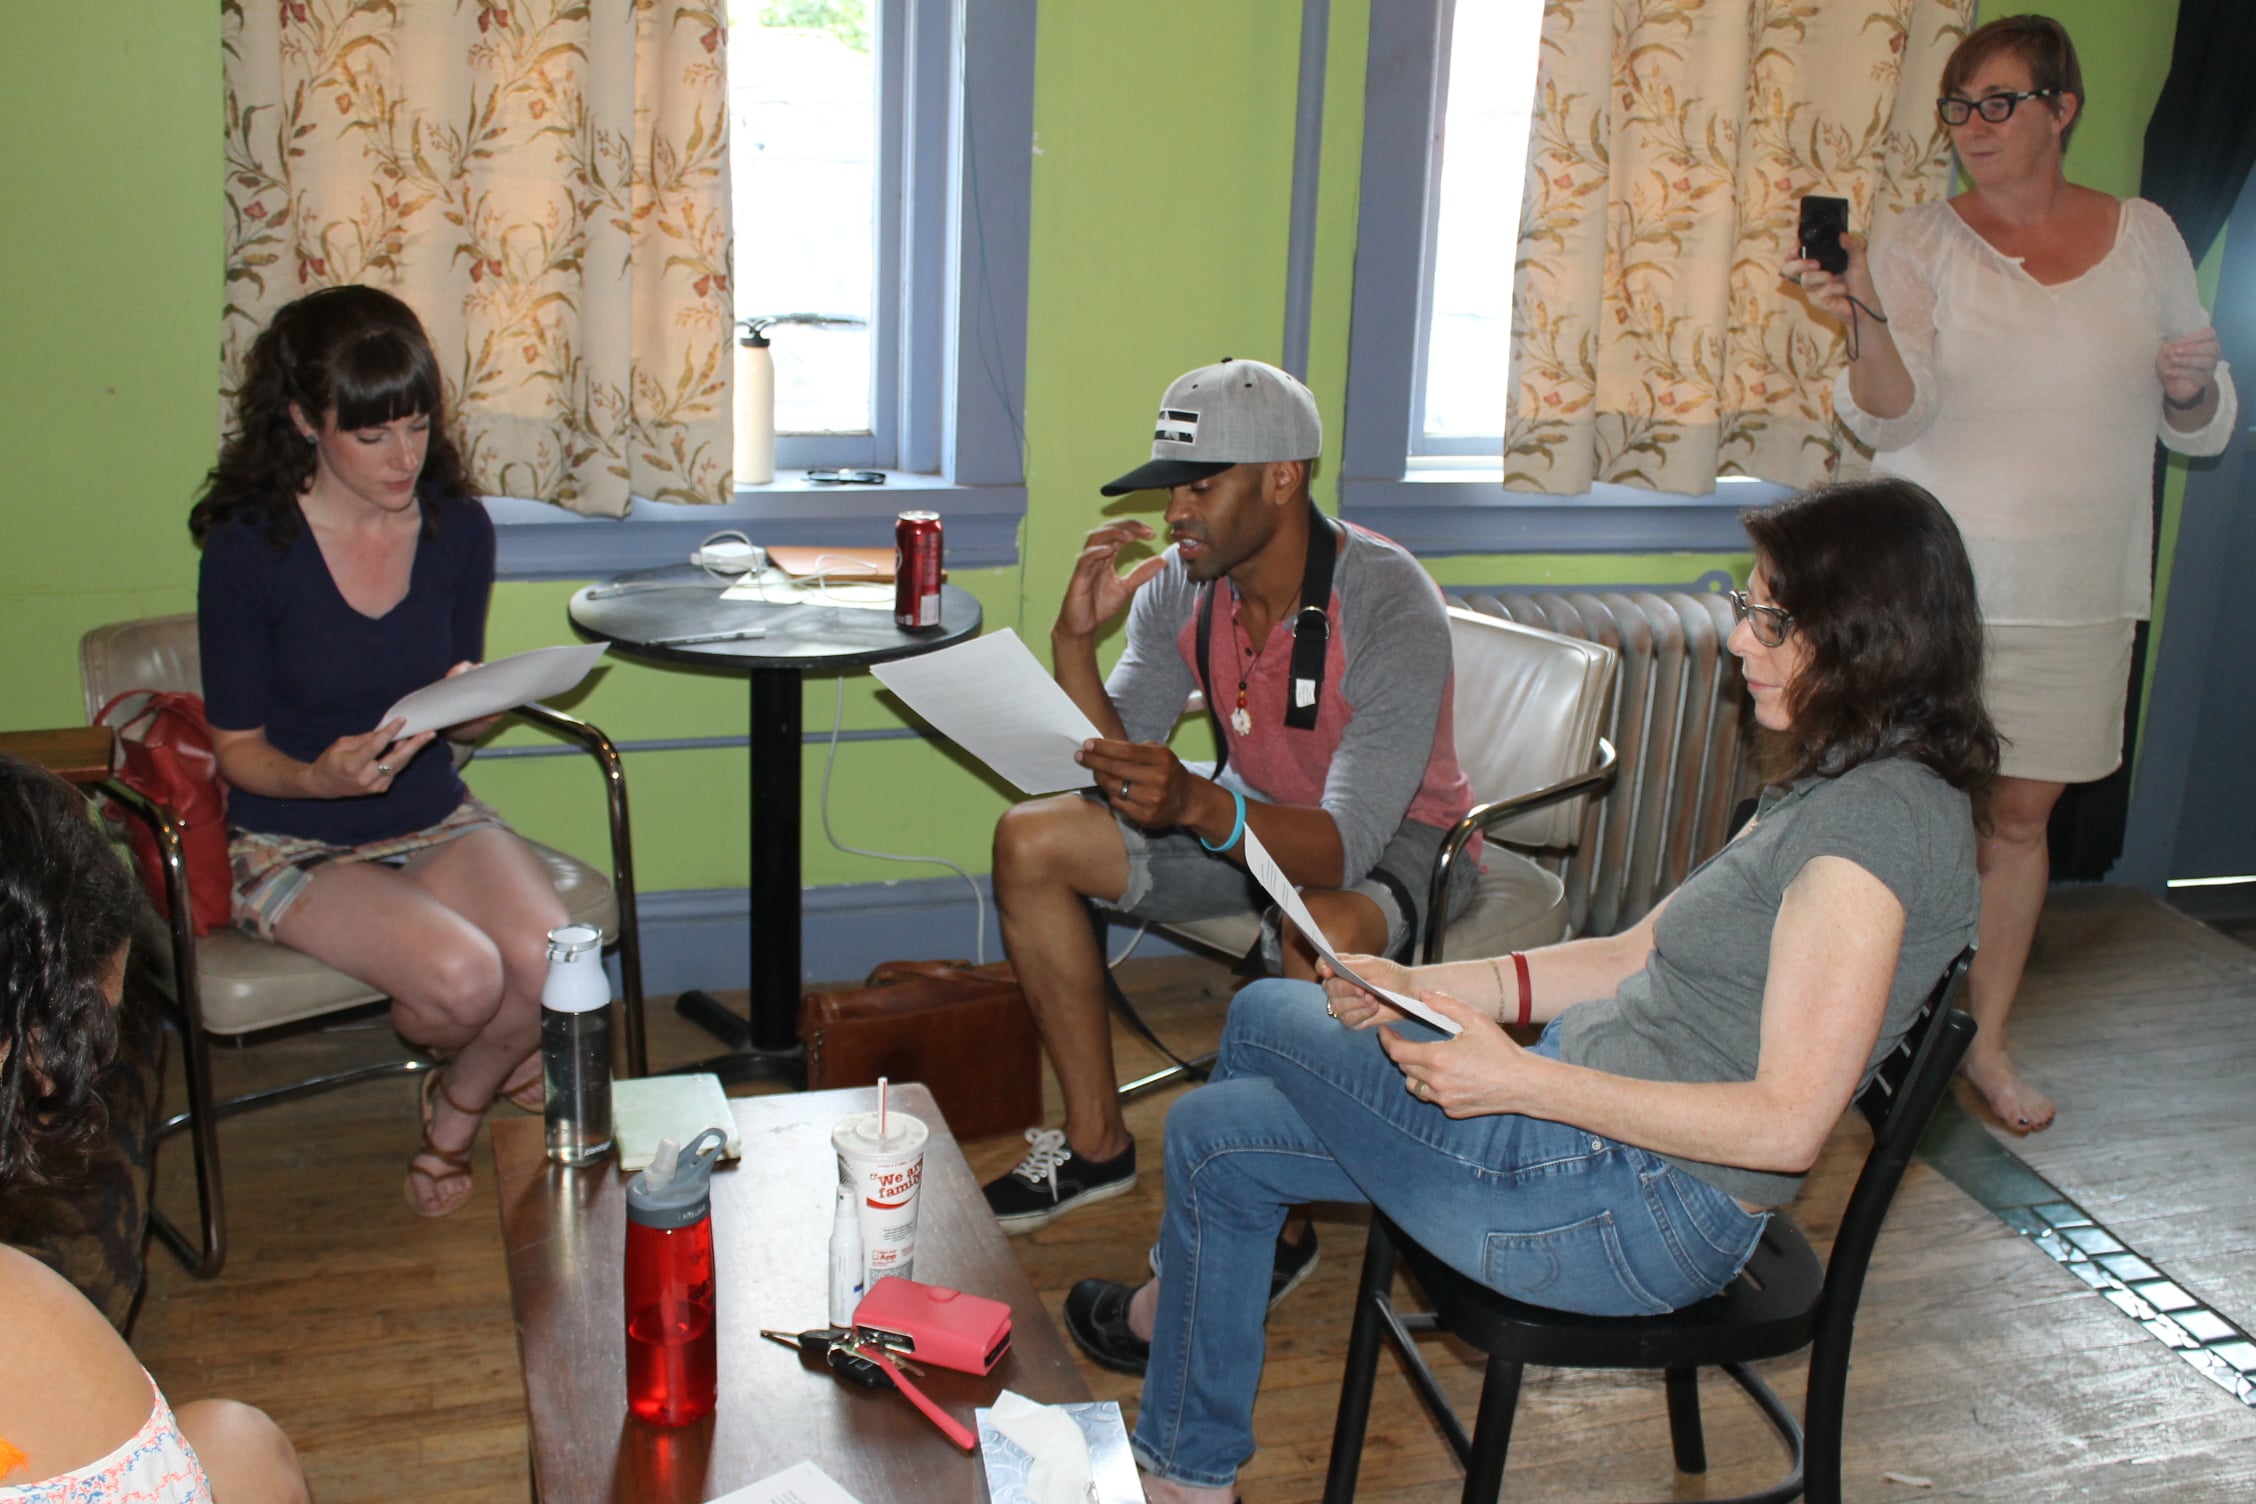 Actors sit at a kitchen table and rehearse their lines.